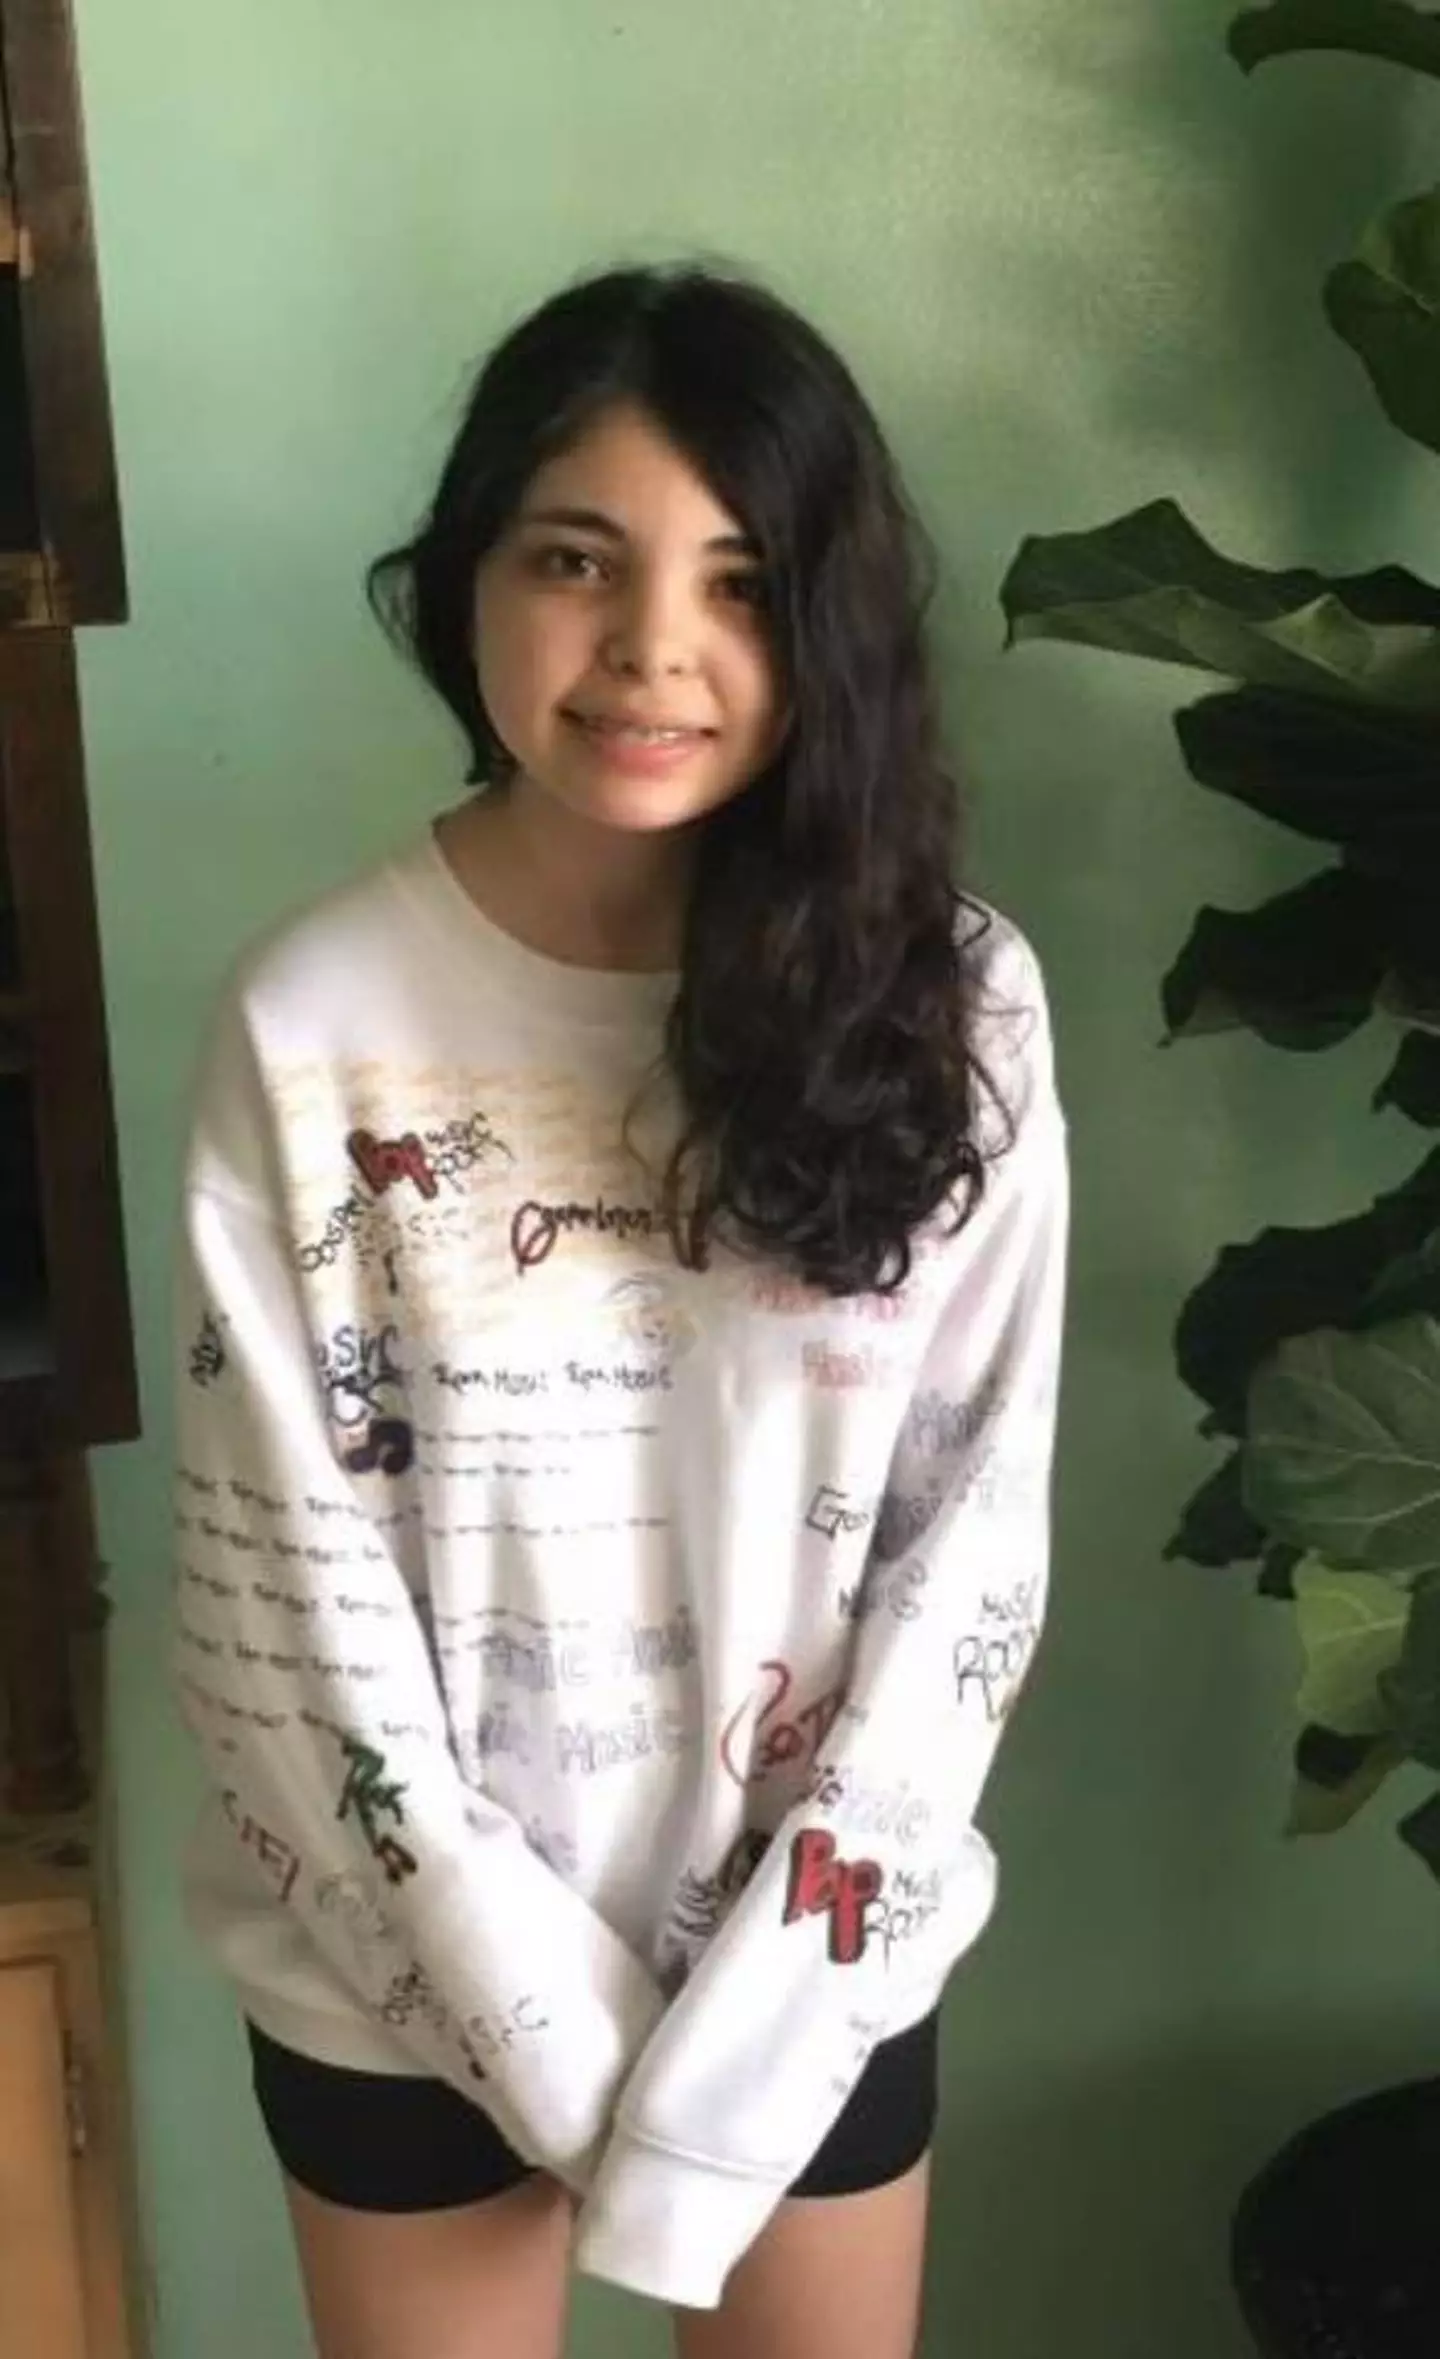 Alicia Navarro was 14 when she was reported missing in 2019.